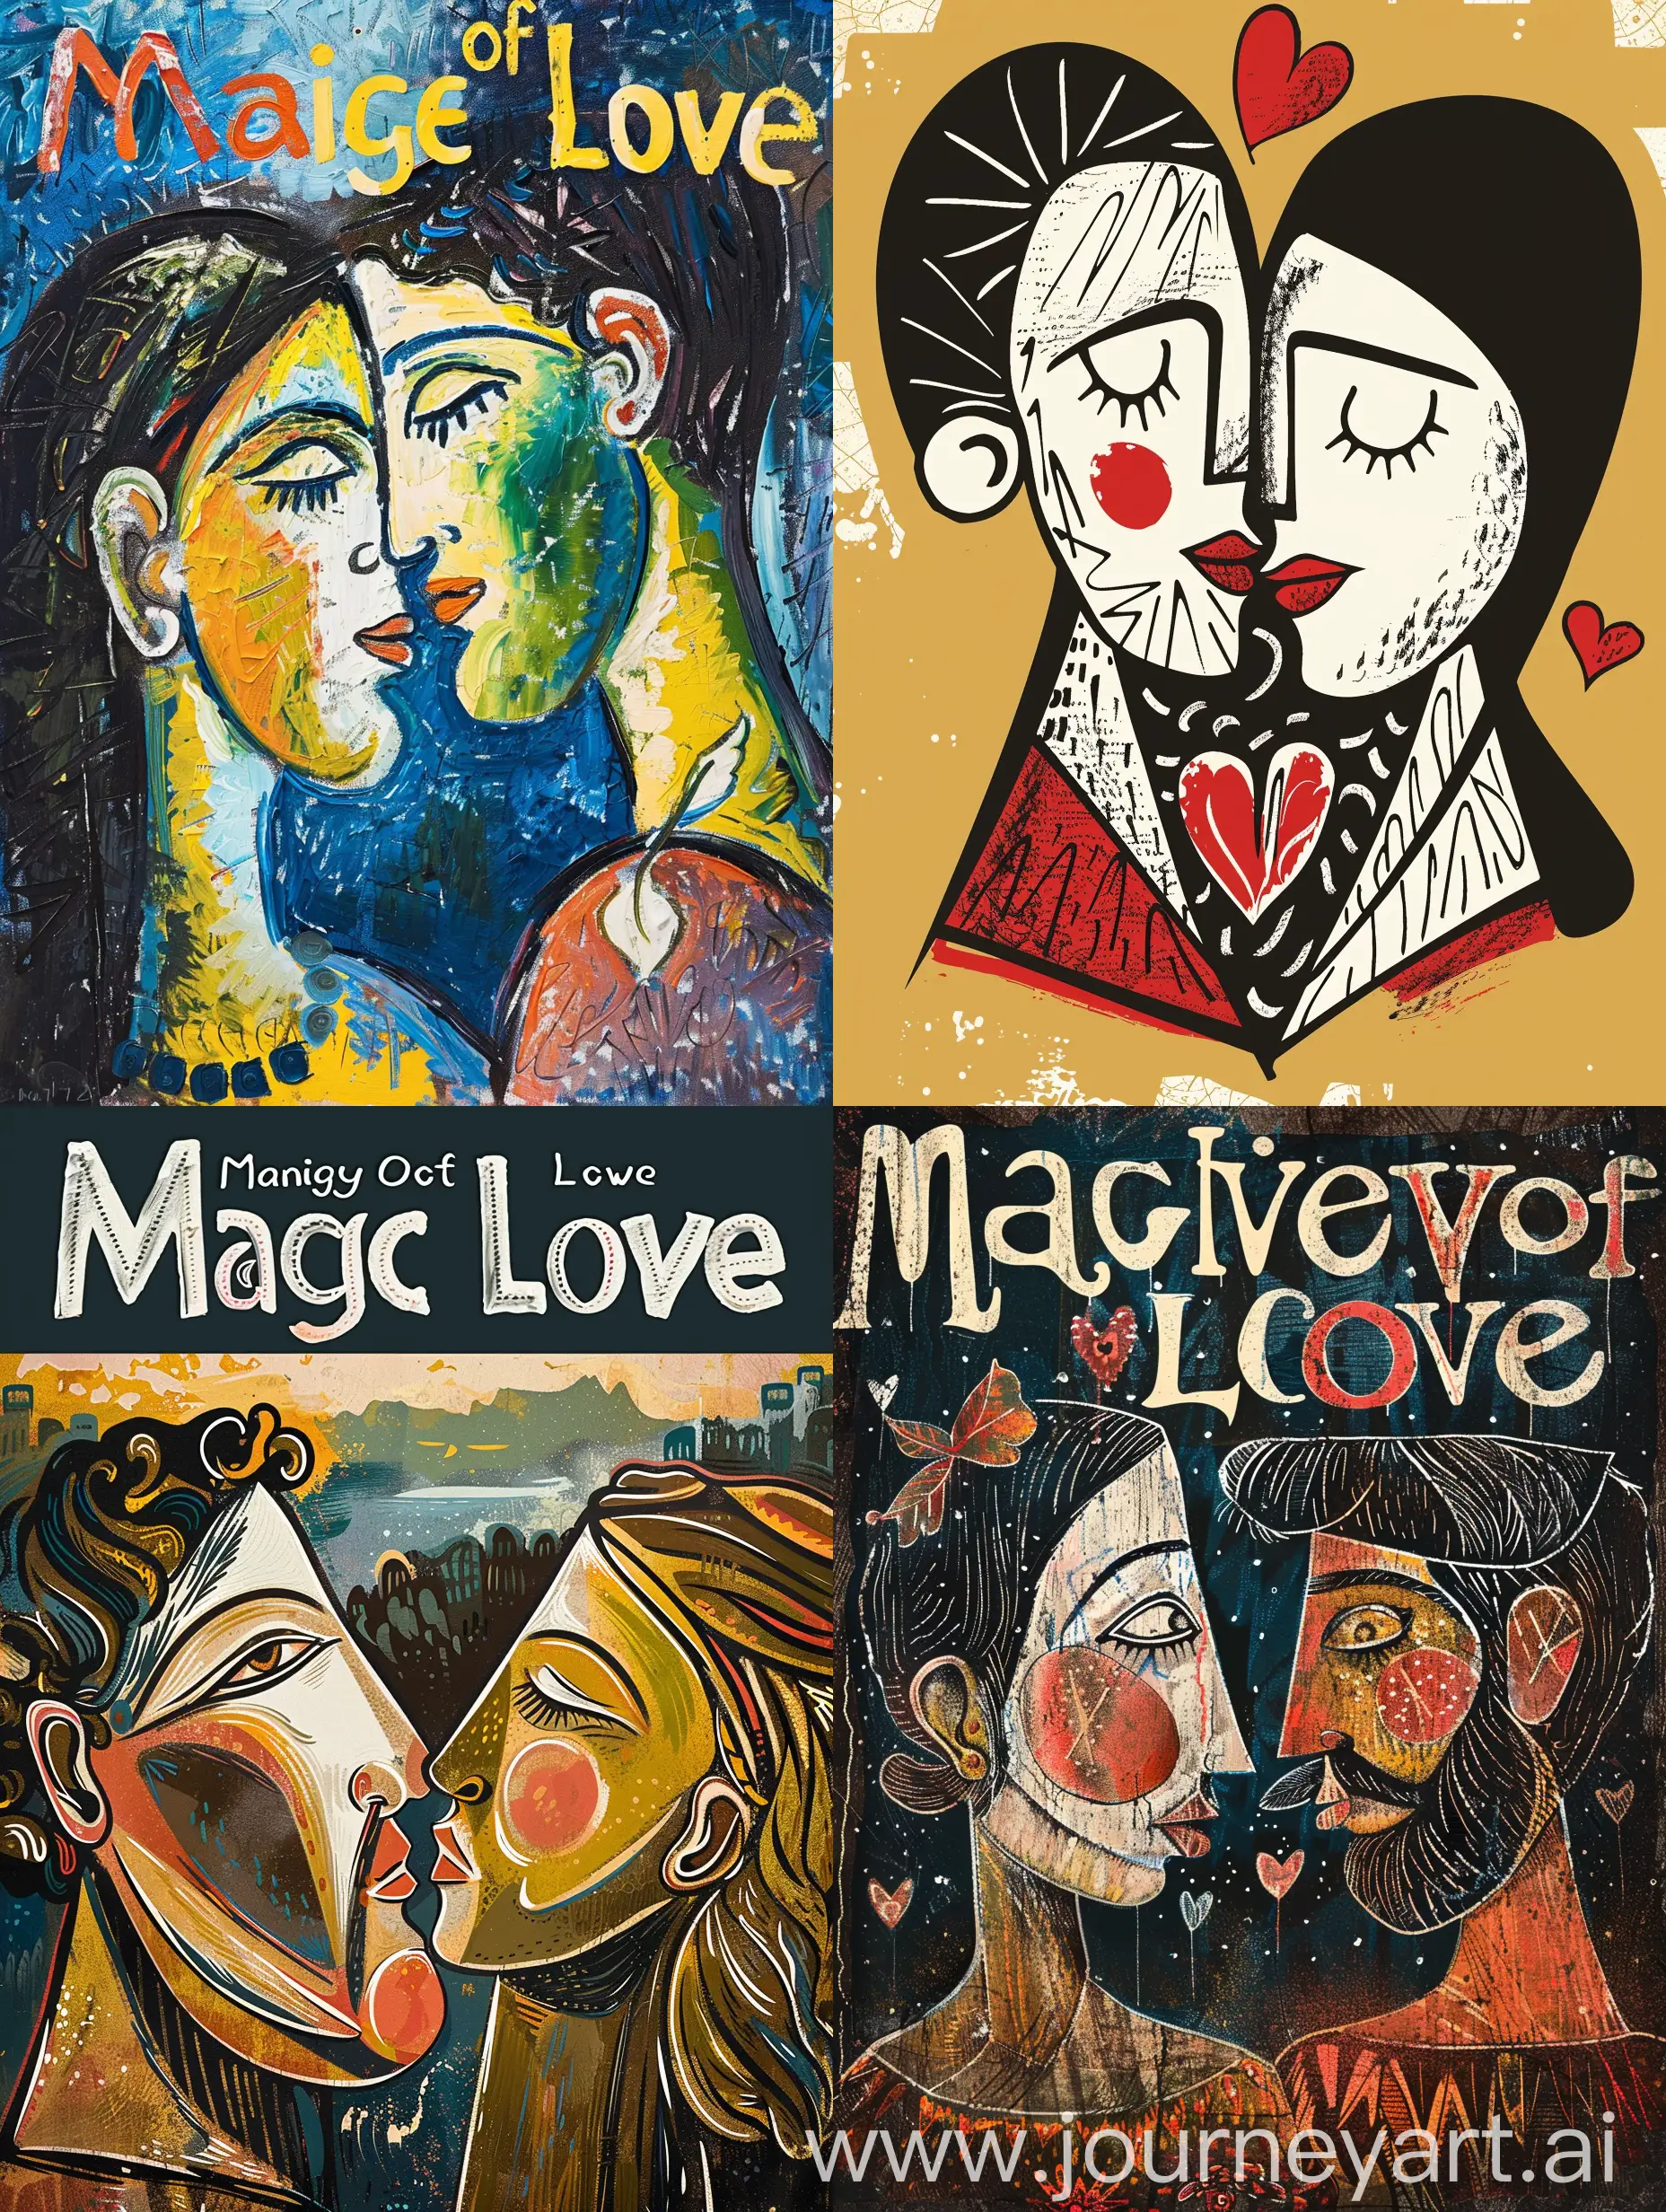 Picasso-Style-Art-Capturing-the-Magic-of-Love